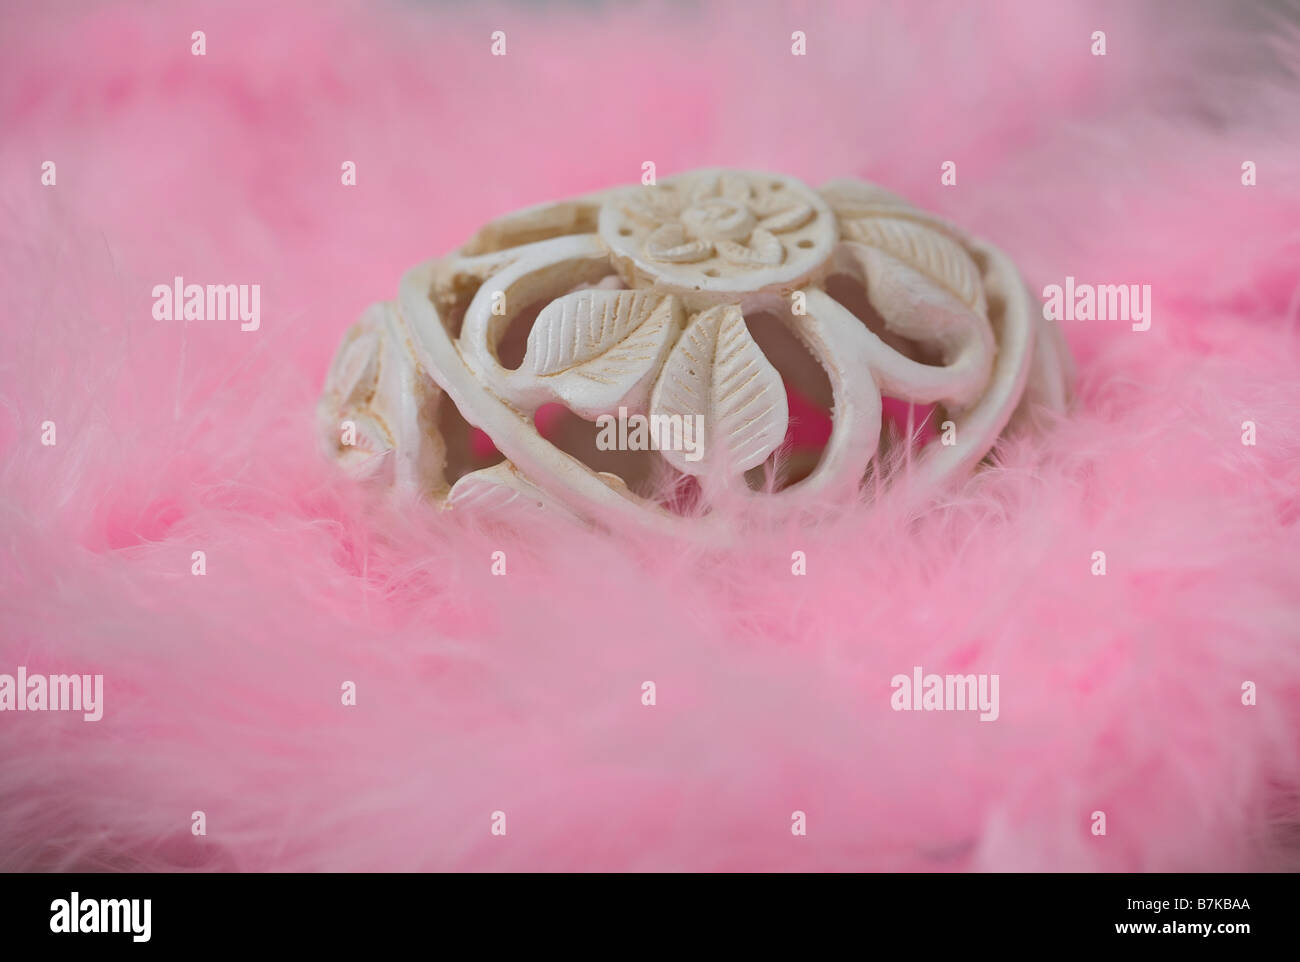 Decorative carved Easter egg resting on pink feathers Stock Photo